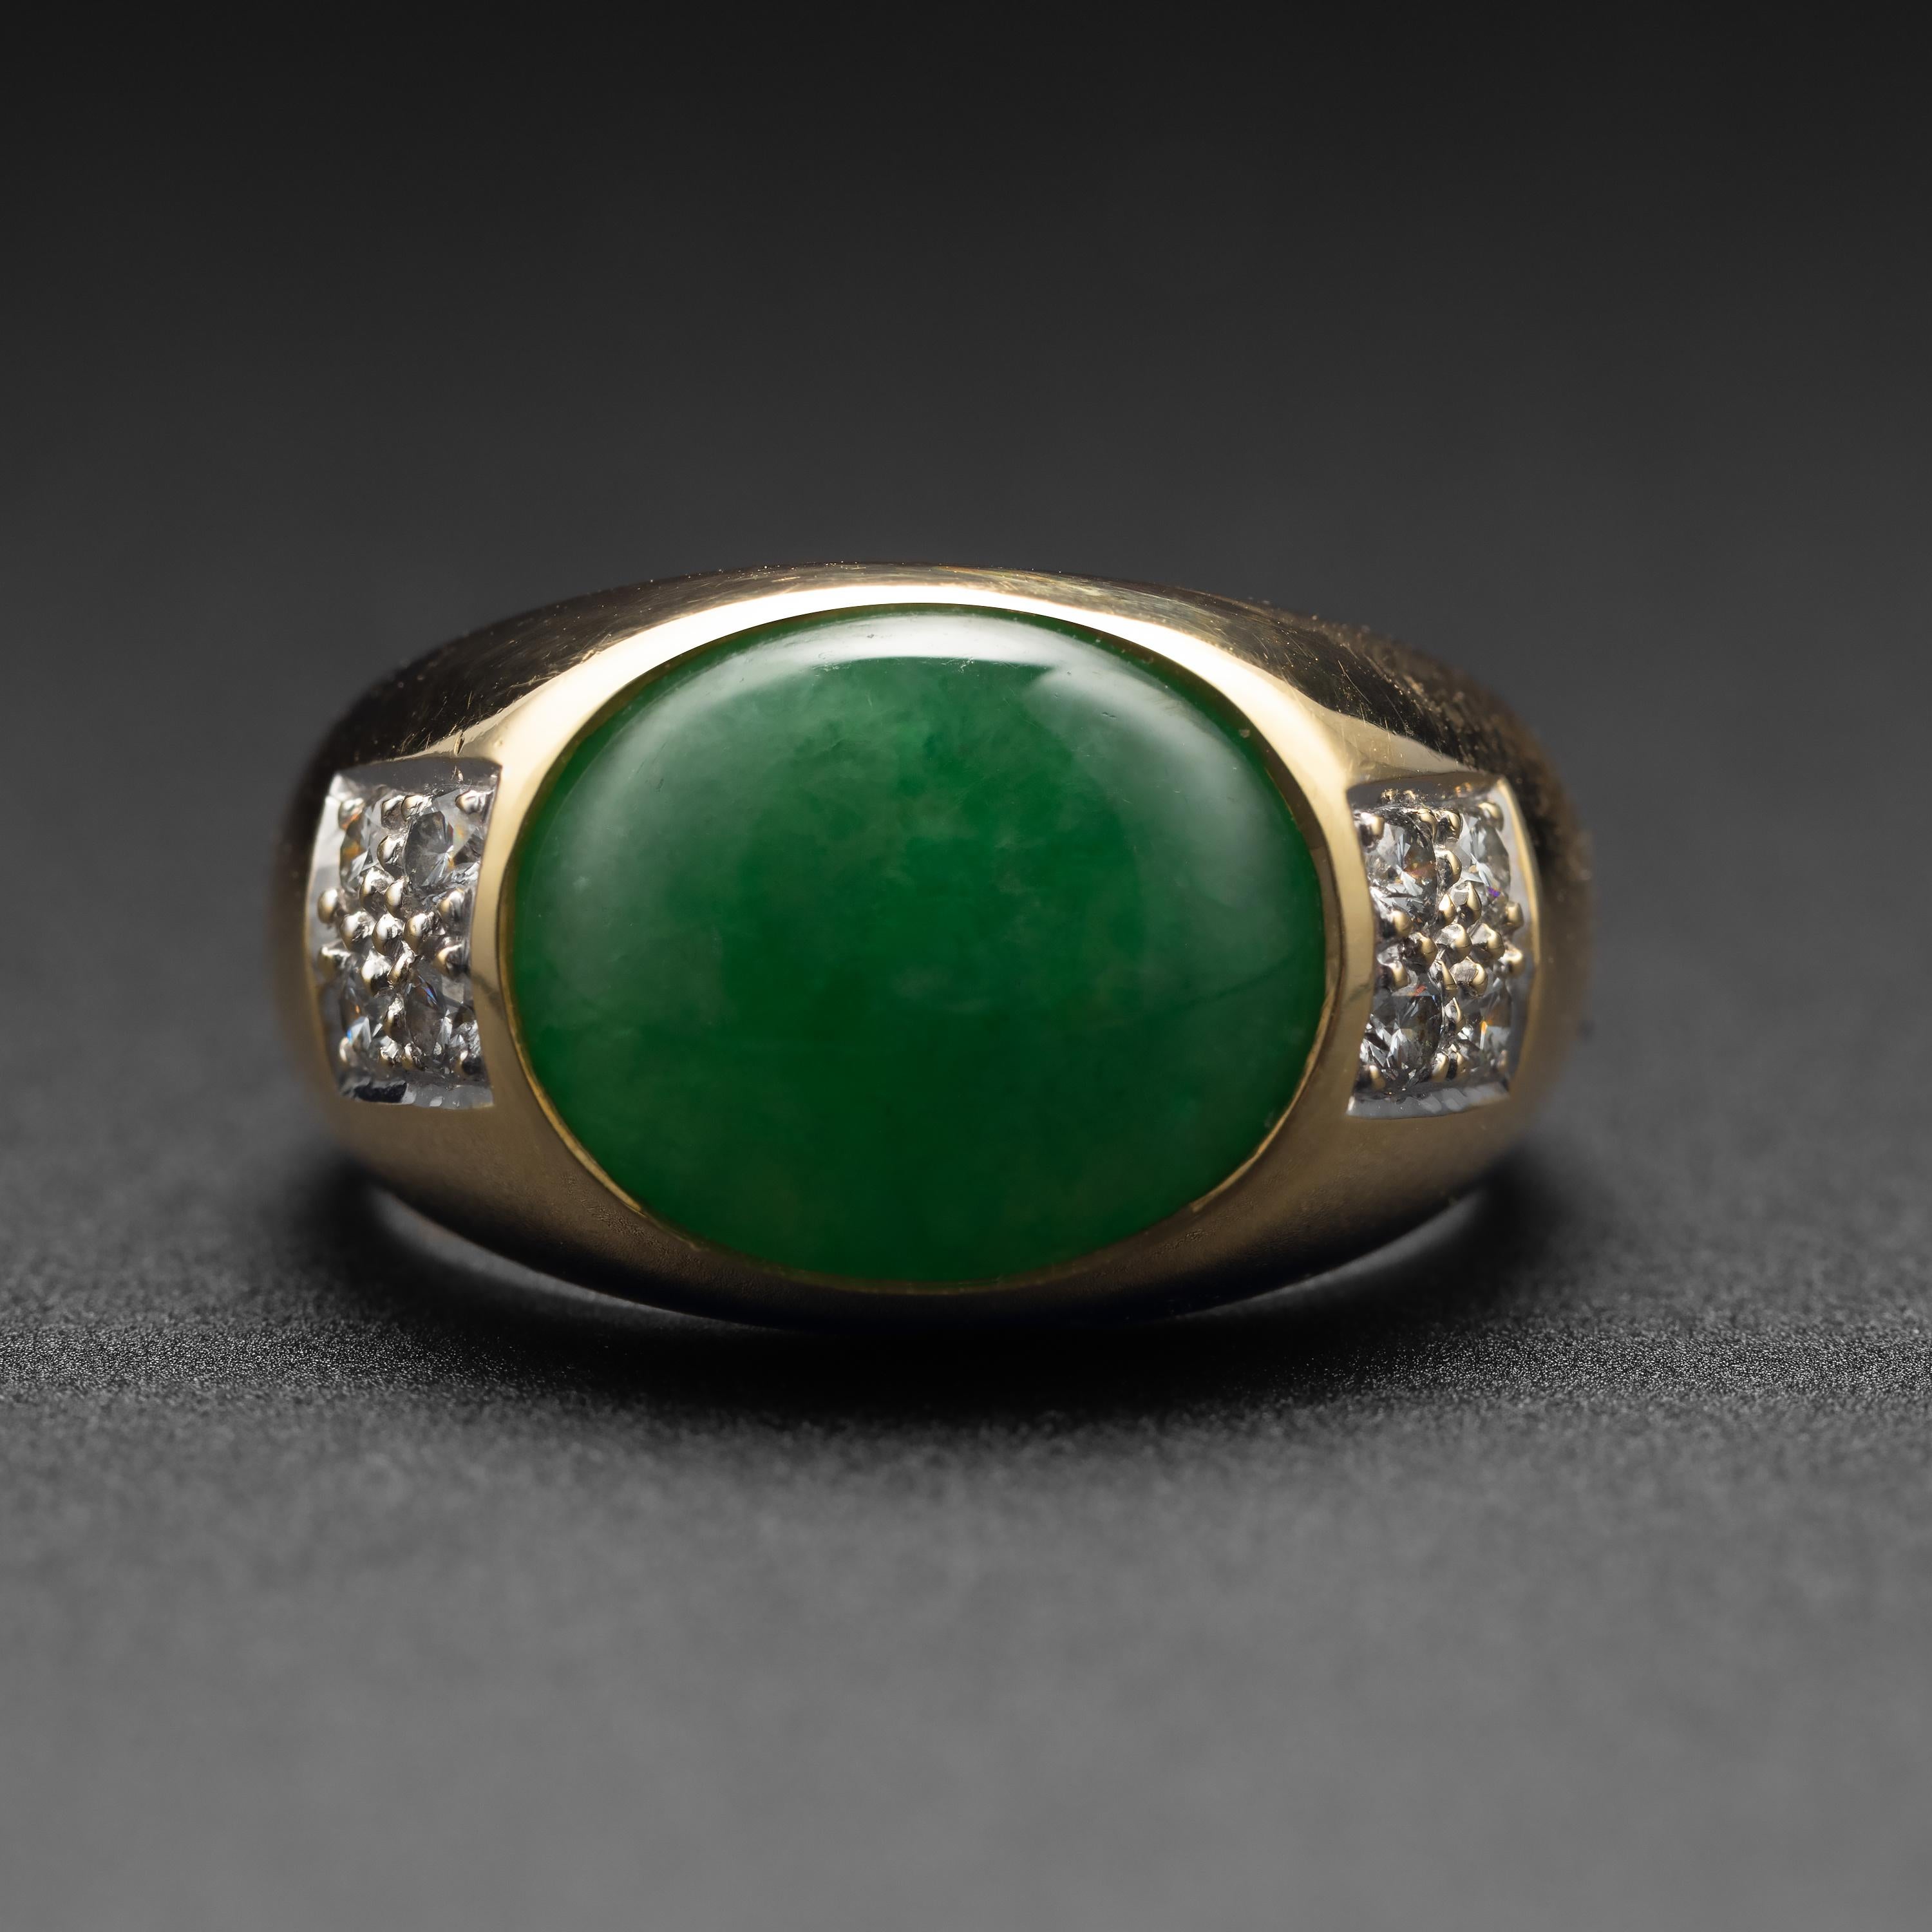 This vintage (circa 1980s) 18K yellow gold ring is sleek and timelessly classic. The focal point of, of course, is the vivid apple-green double cabochon of natural and untreated jadeite jade from Burma. The stone measures 13.25mm x 10.85mm and is